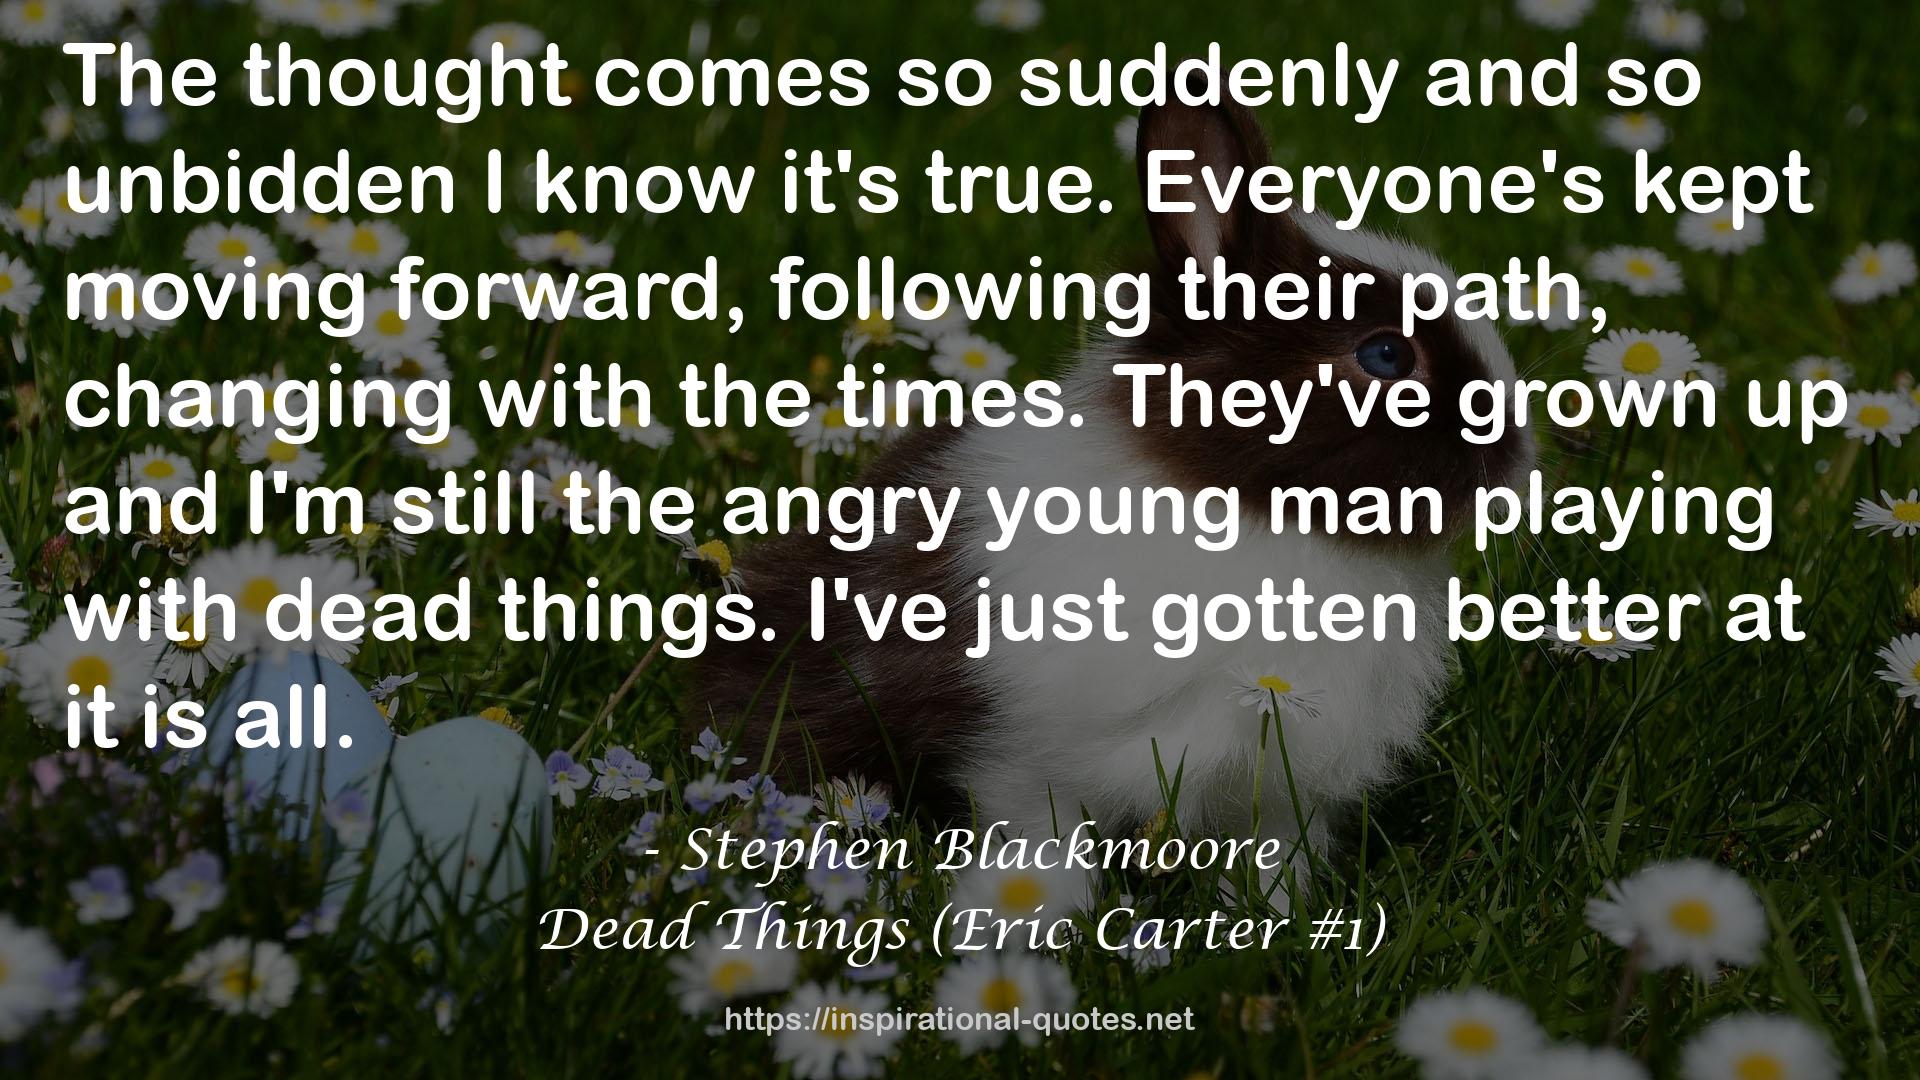 Dead Things (Eric Carter #1) QUOTES